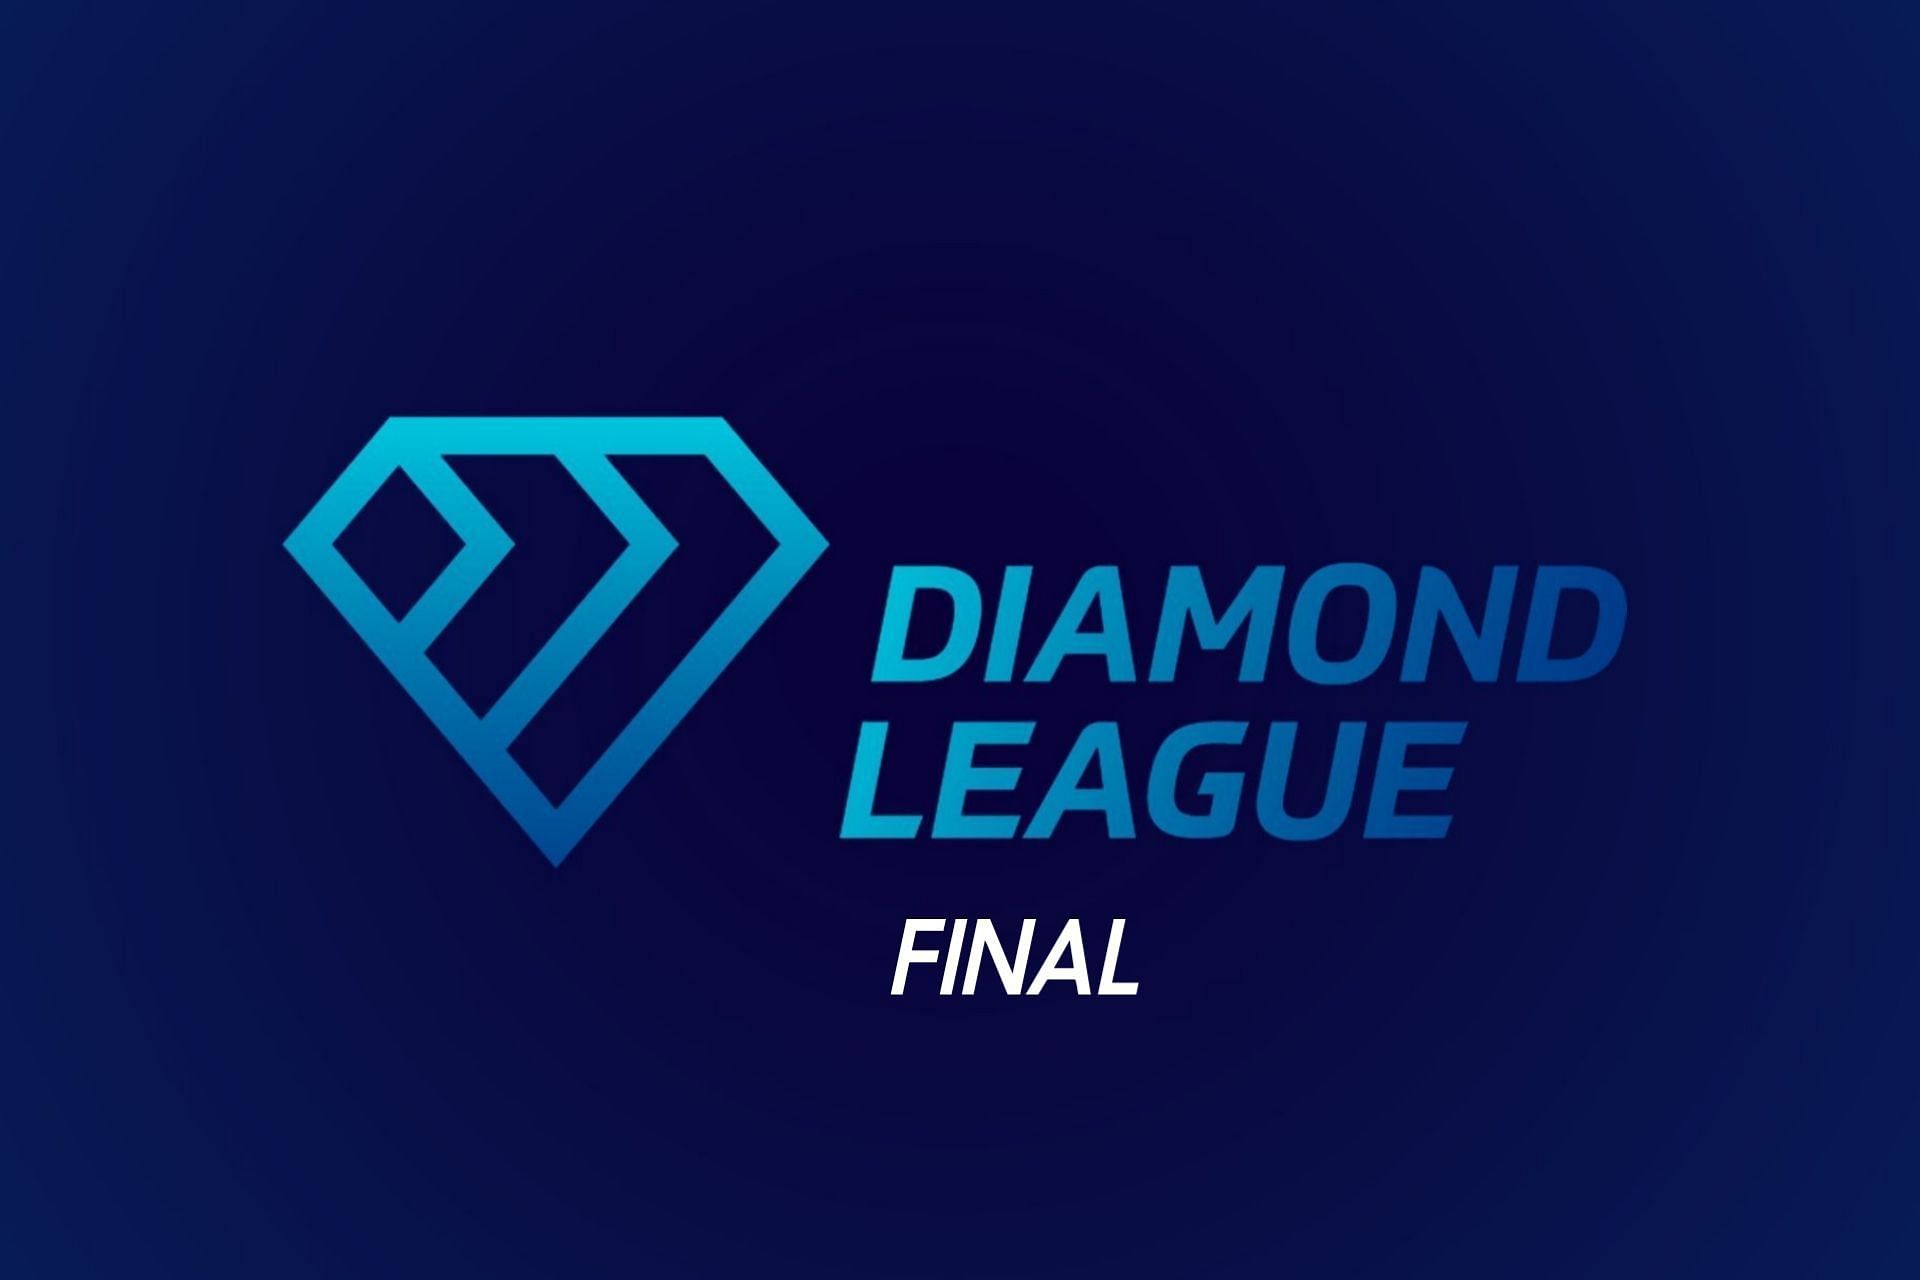 Diamond League 2022 Final Full list of events and finalists